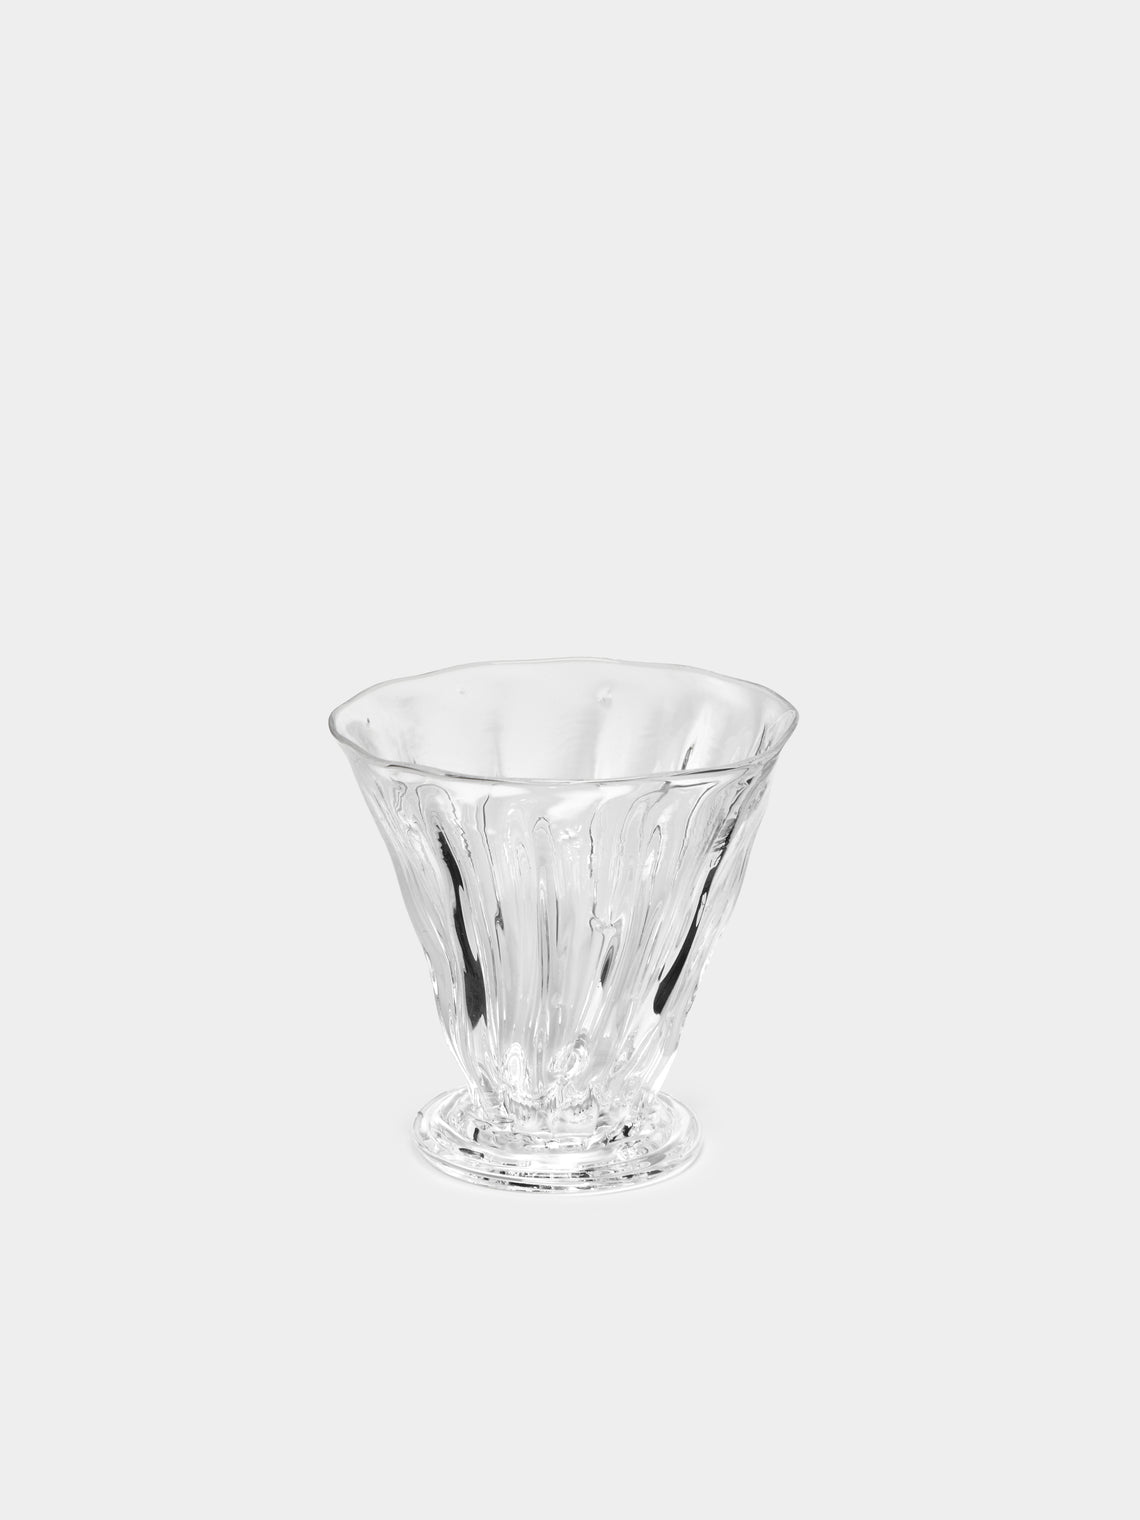 Alexander Kirkeby - Hand-Blown Crystal Small Tumbler -  - ABASK - 